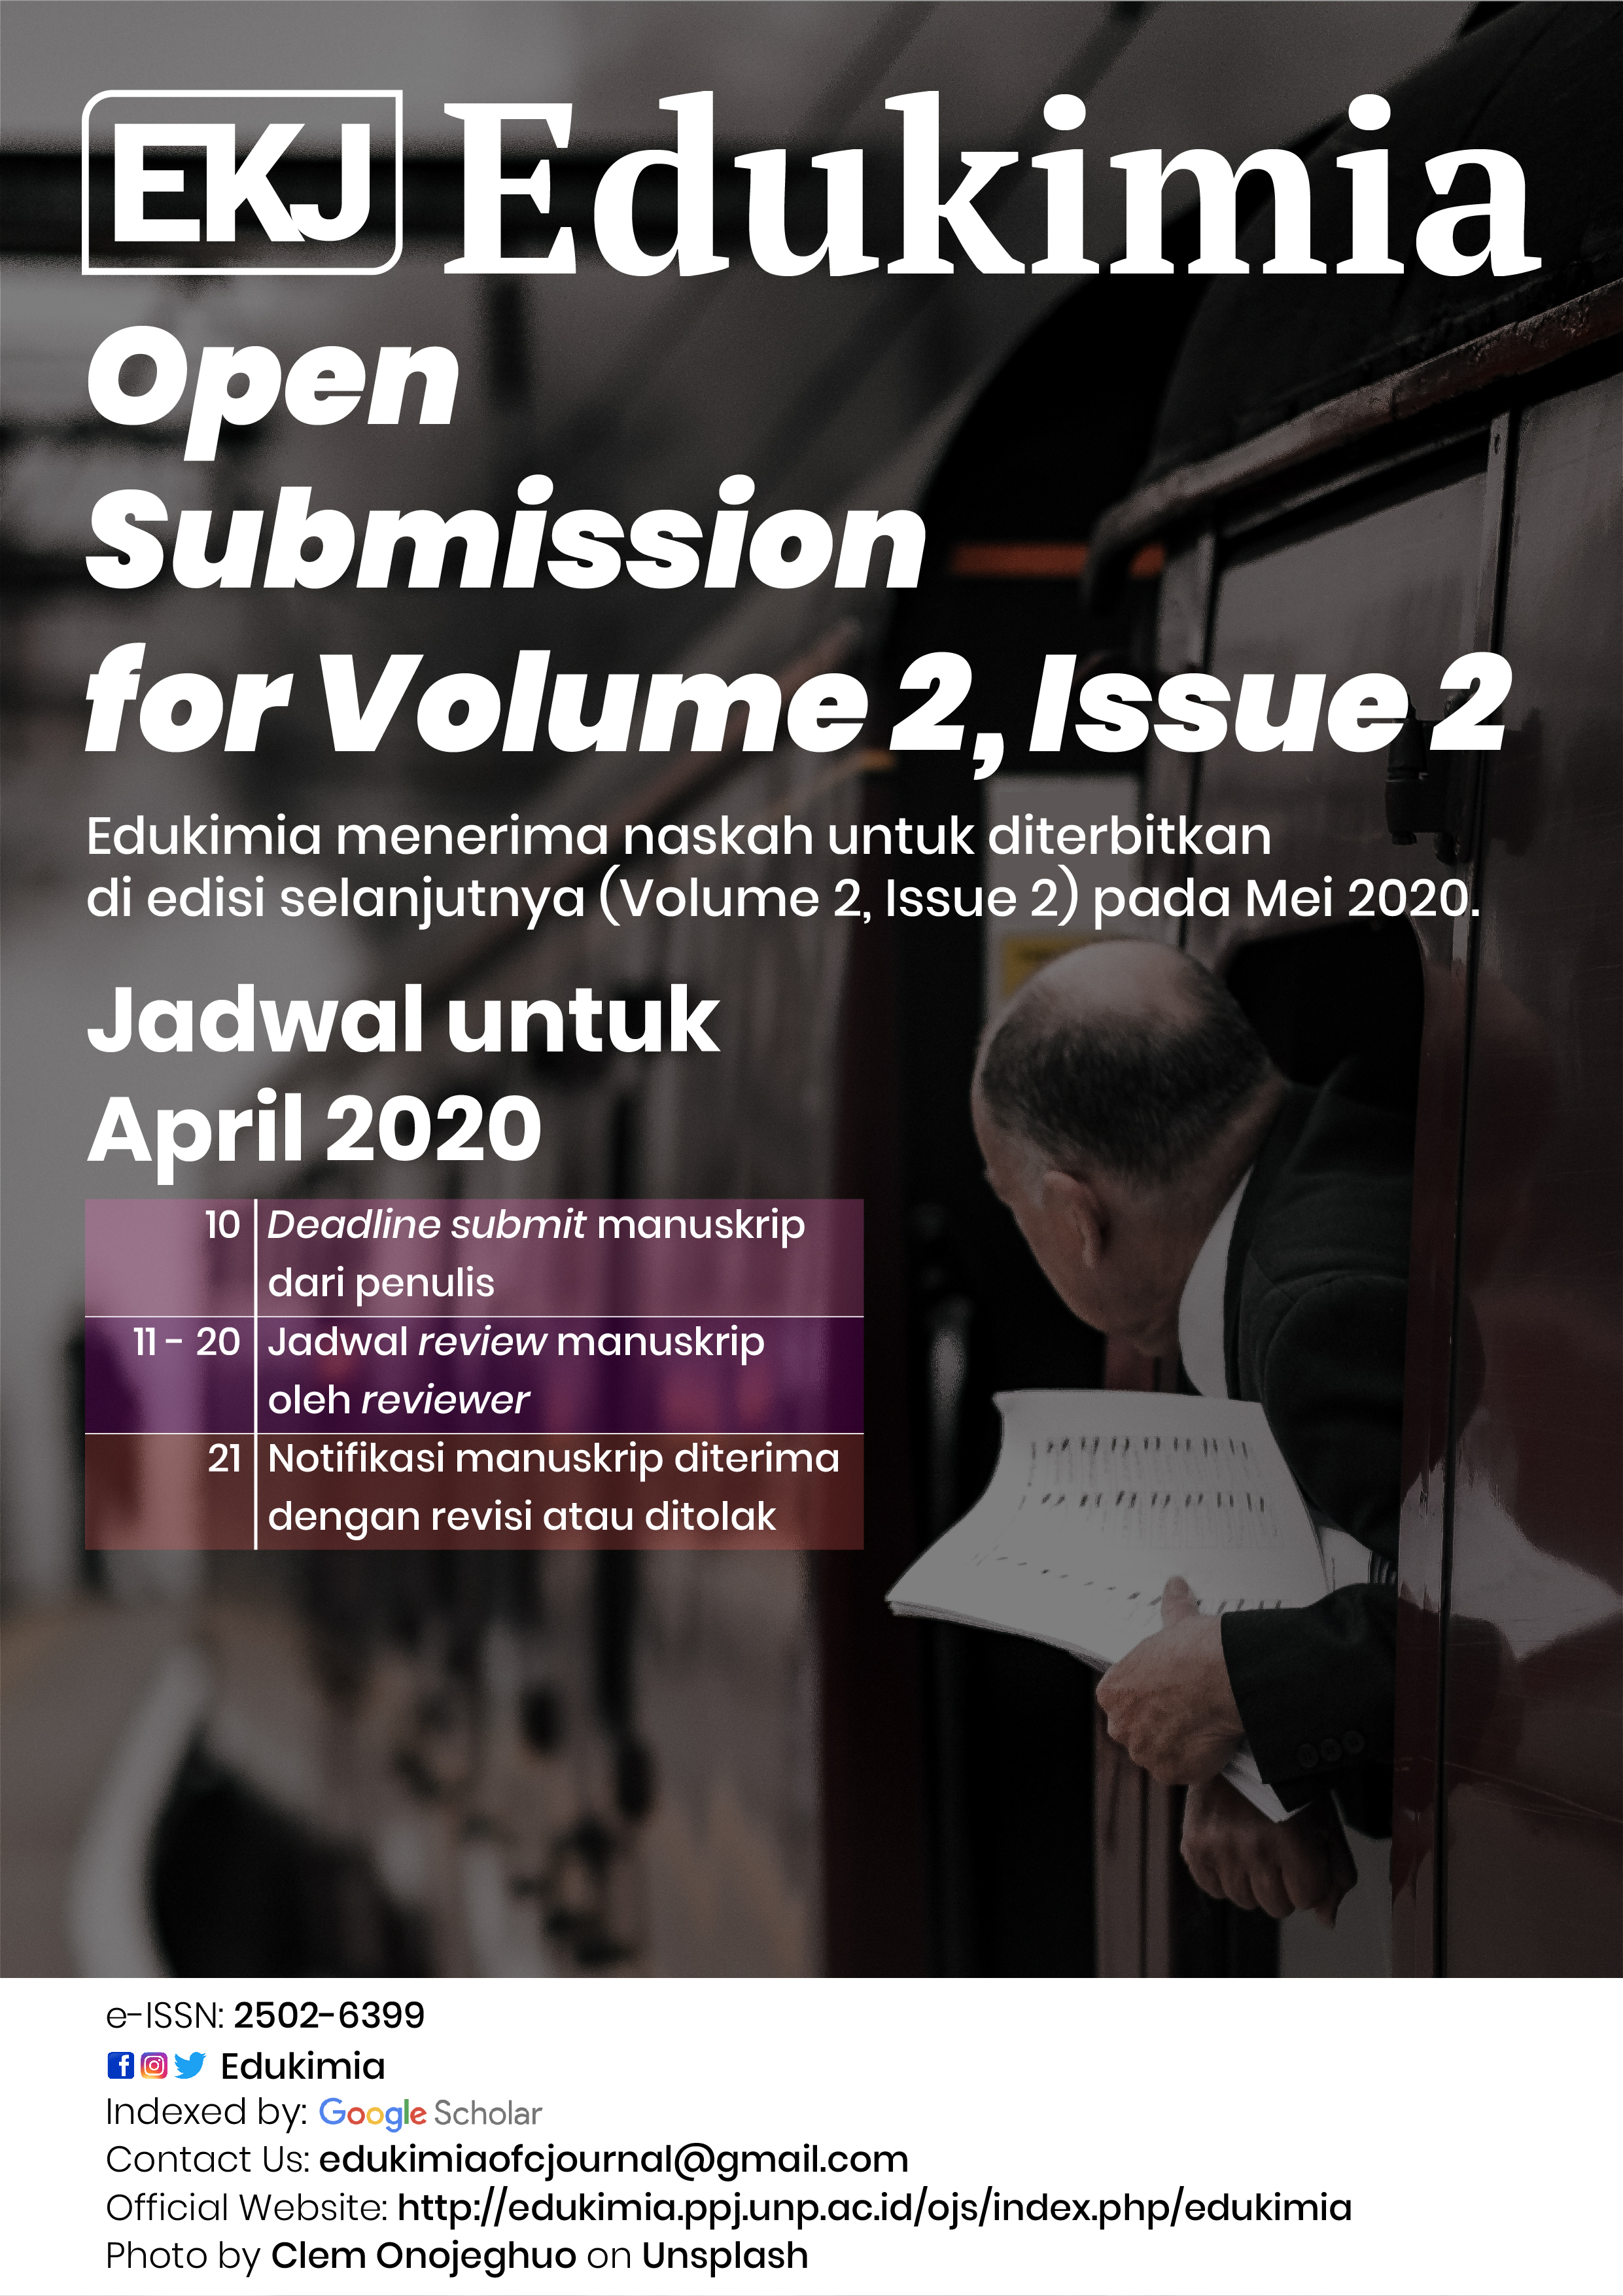 Promotion material about submission information in Edukimia journal, May 2020